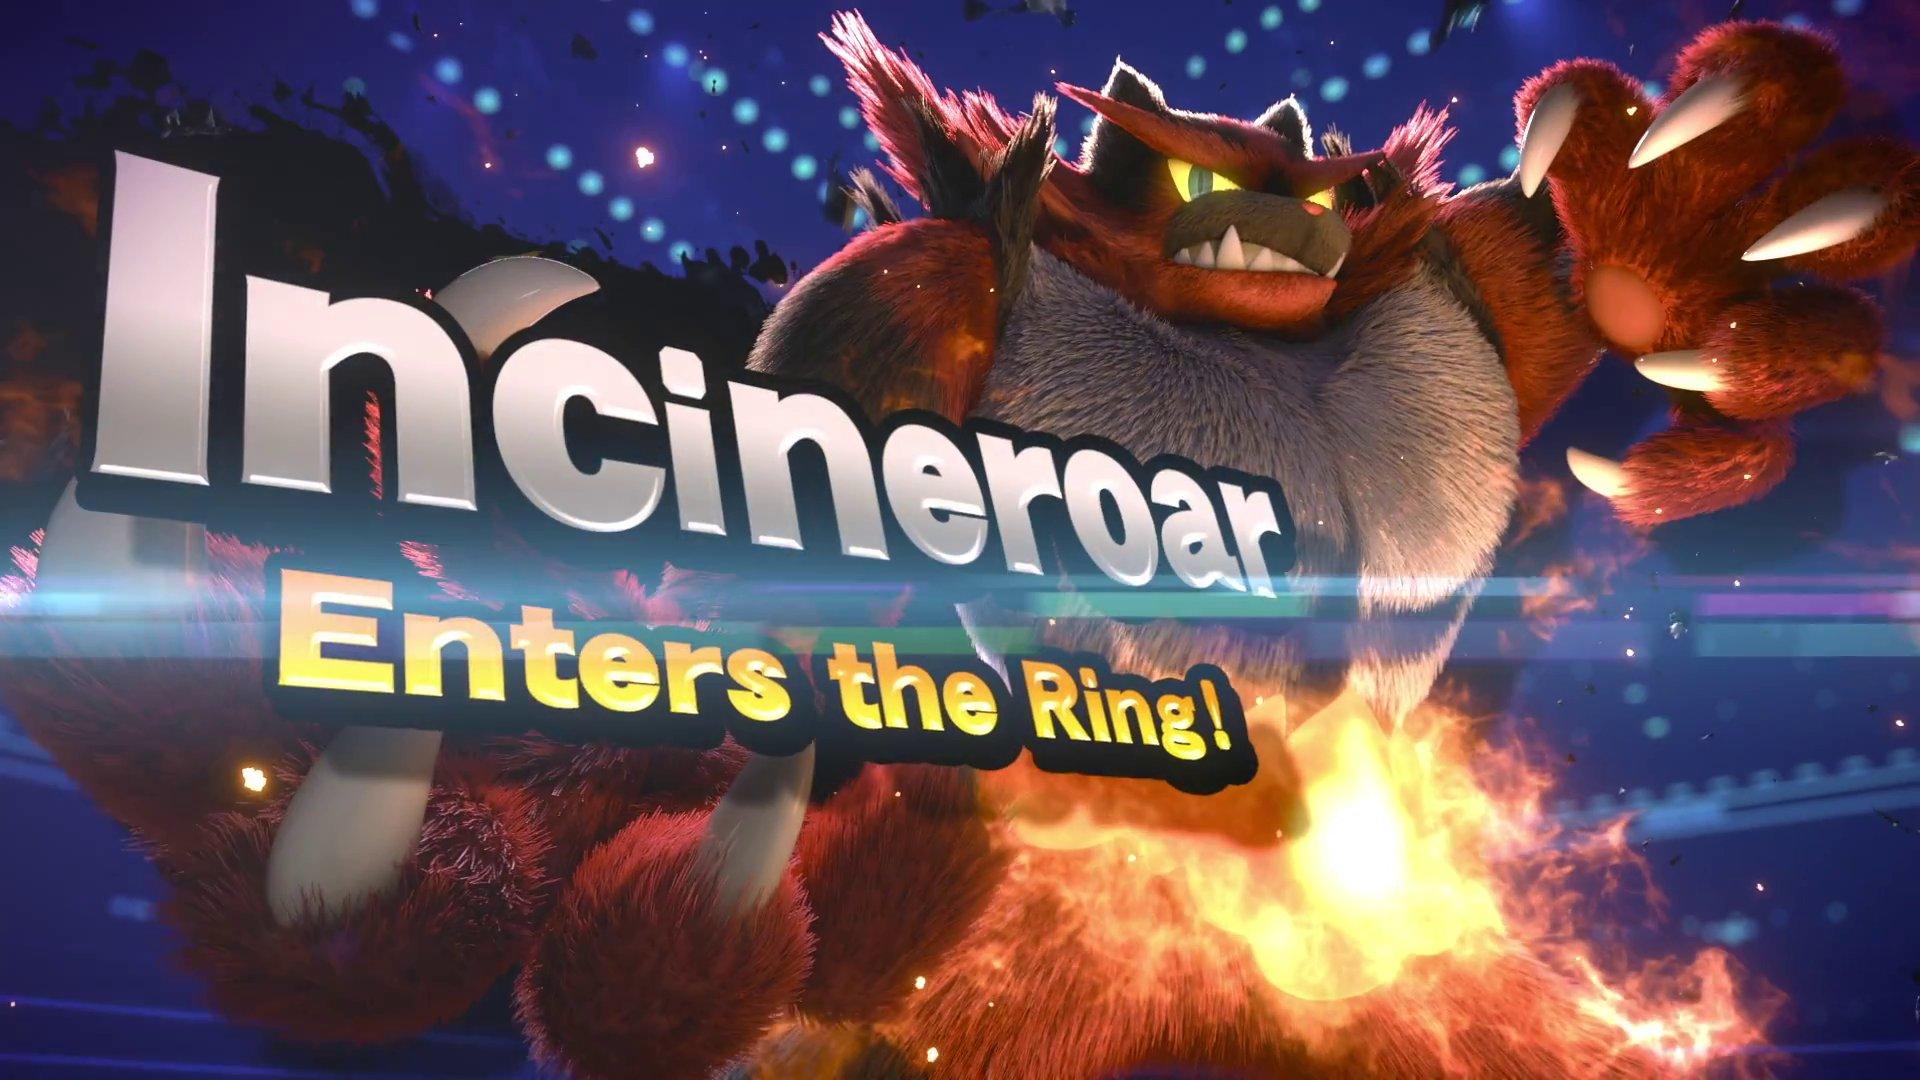 Can someone animate this please? From the smash bros direct